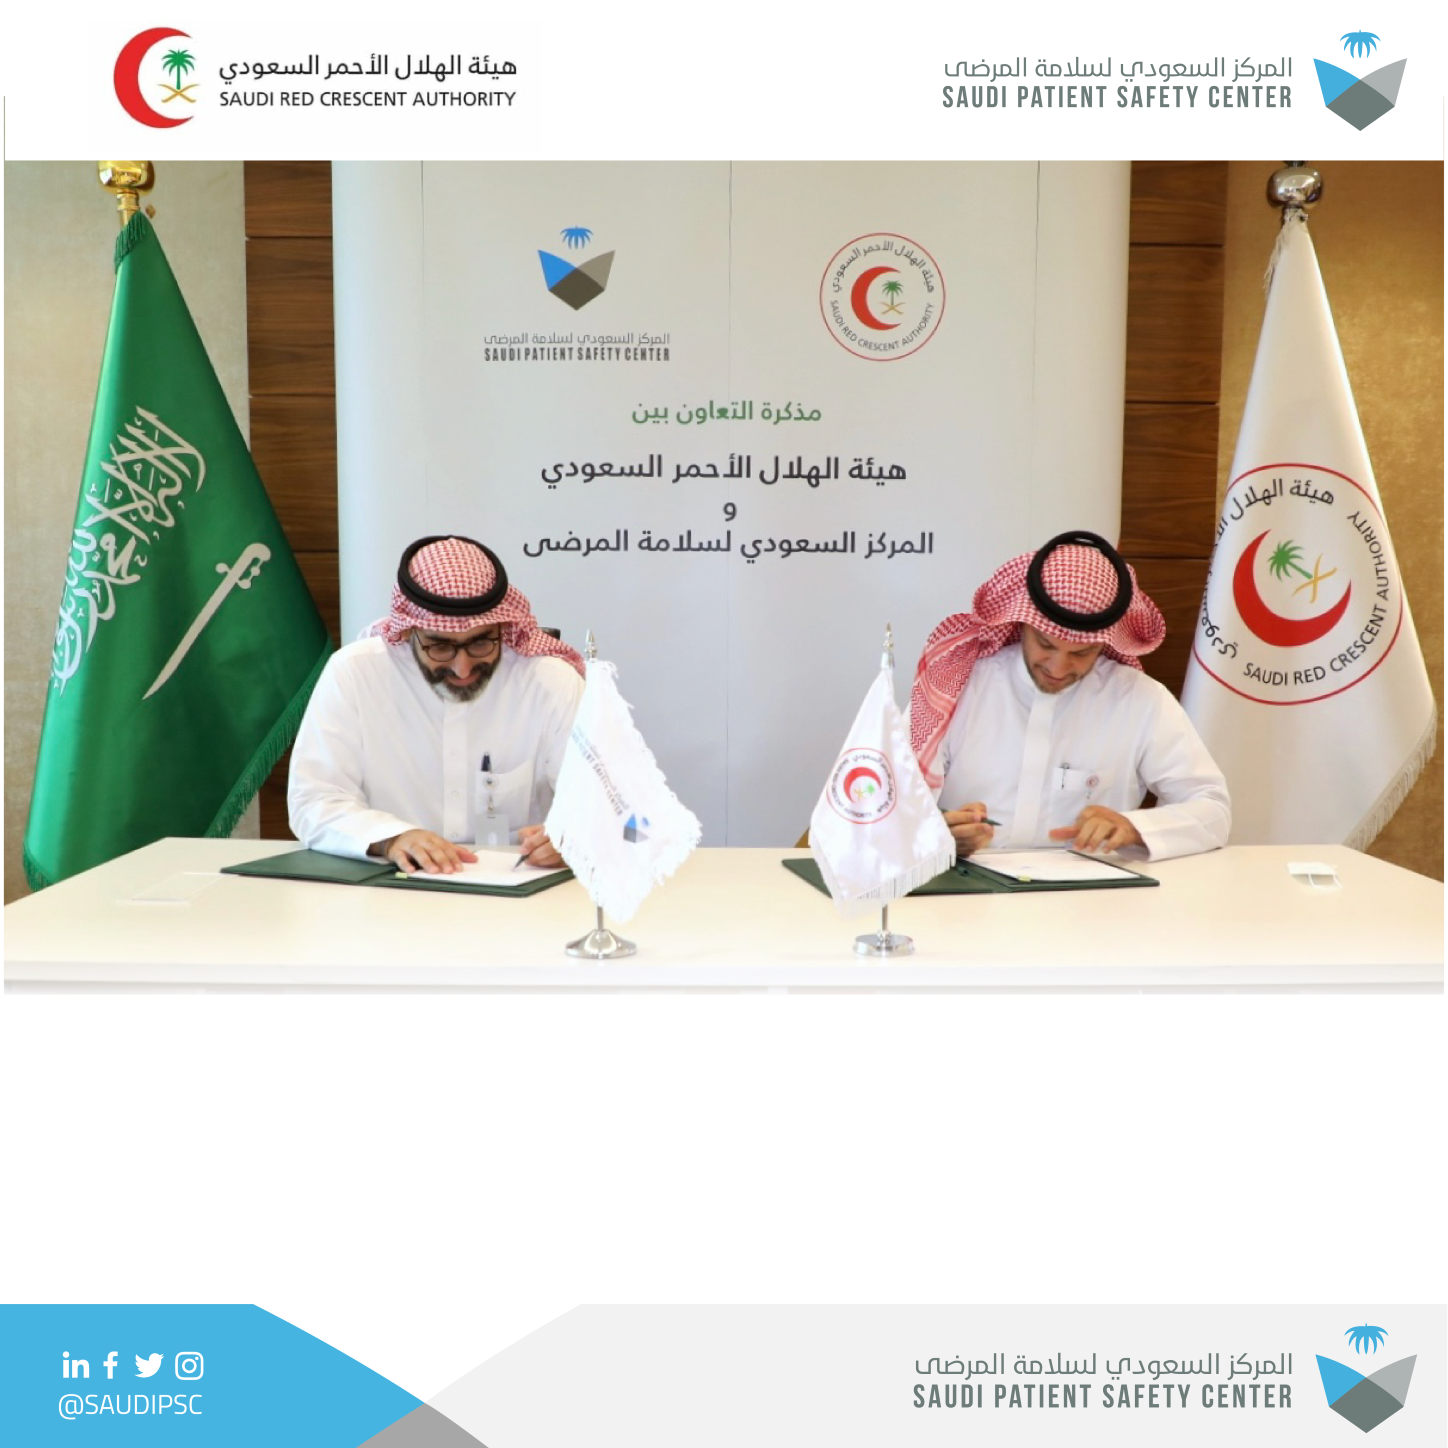 The Saudi Patient Safety Center and Saudi Red Crescent Authority have signed a memorandum of understanding